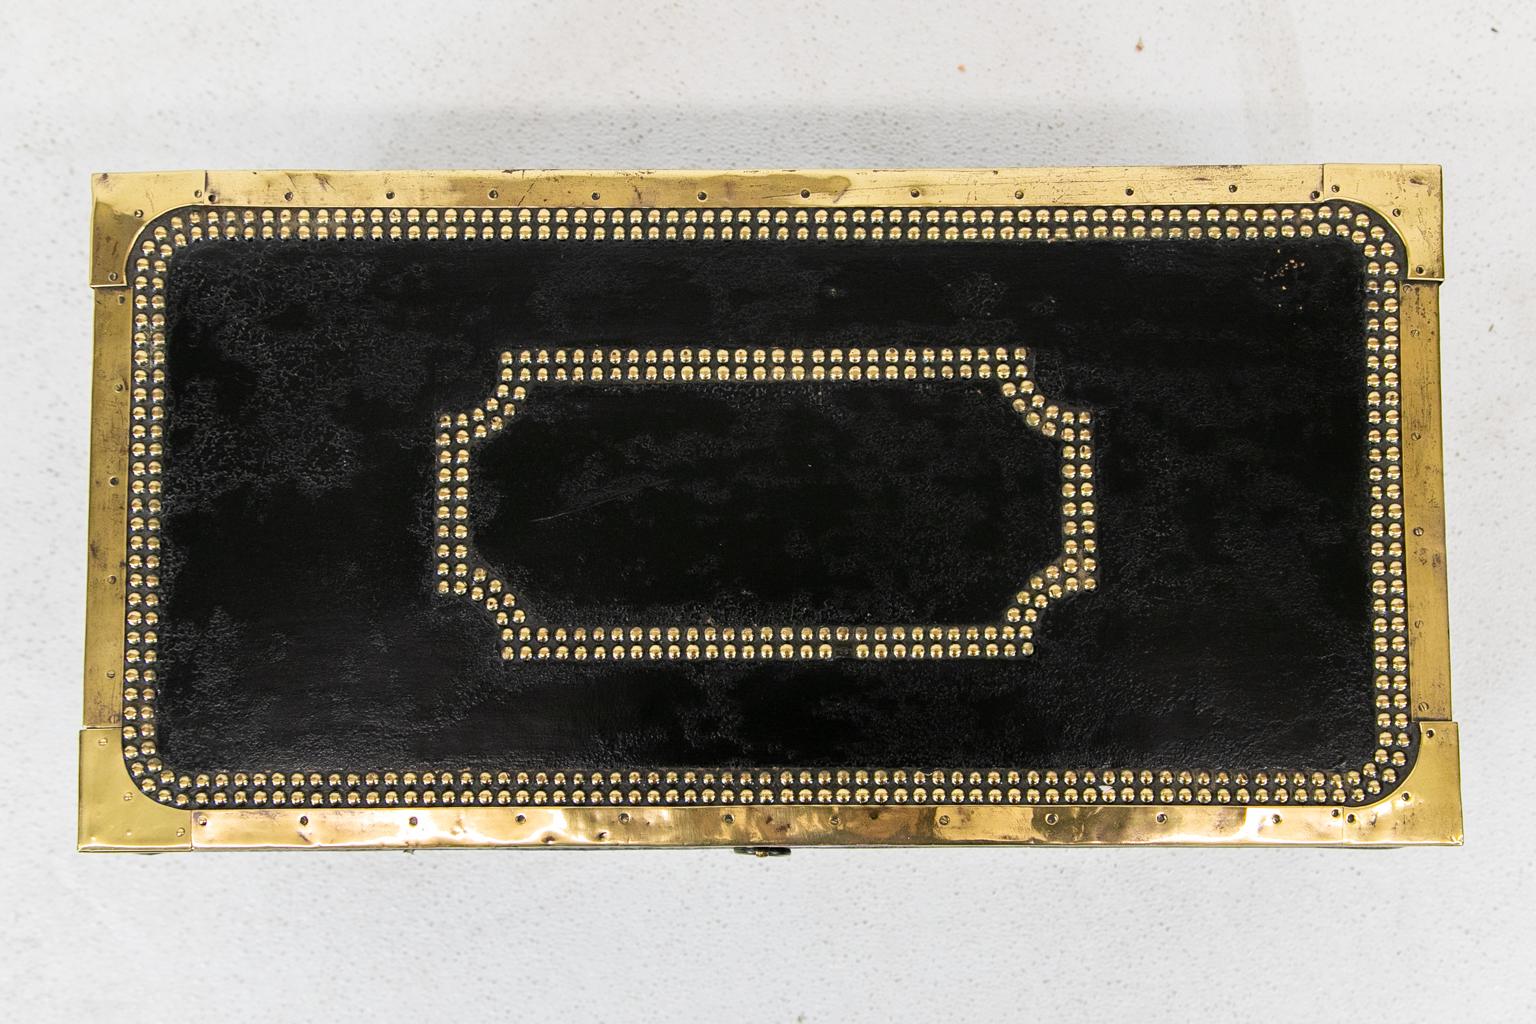 Studded leather camphor wood box has the original paper lining. The piece is black leather banded with brass, and it has a double row of brass stud work.